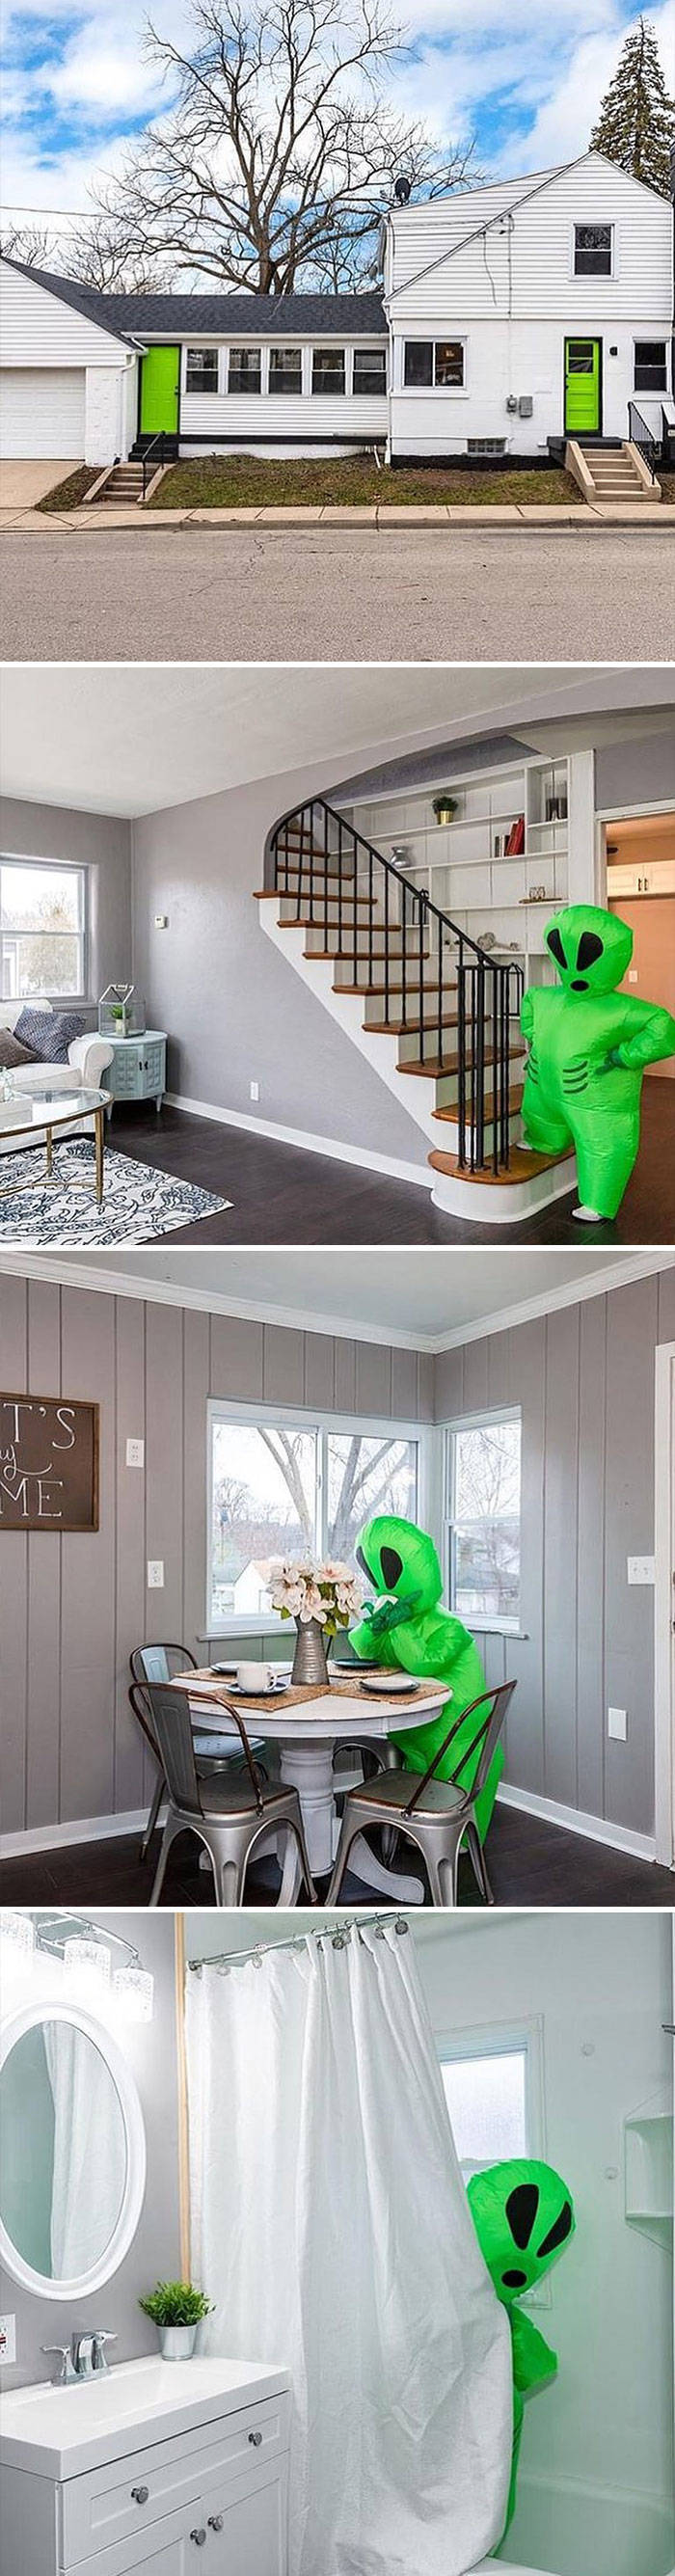 Real Estate Listings Can Be Real Weird…